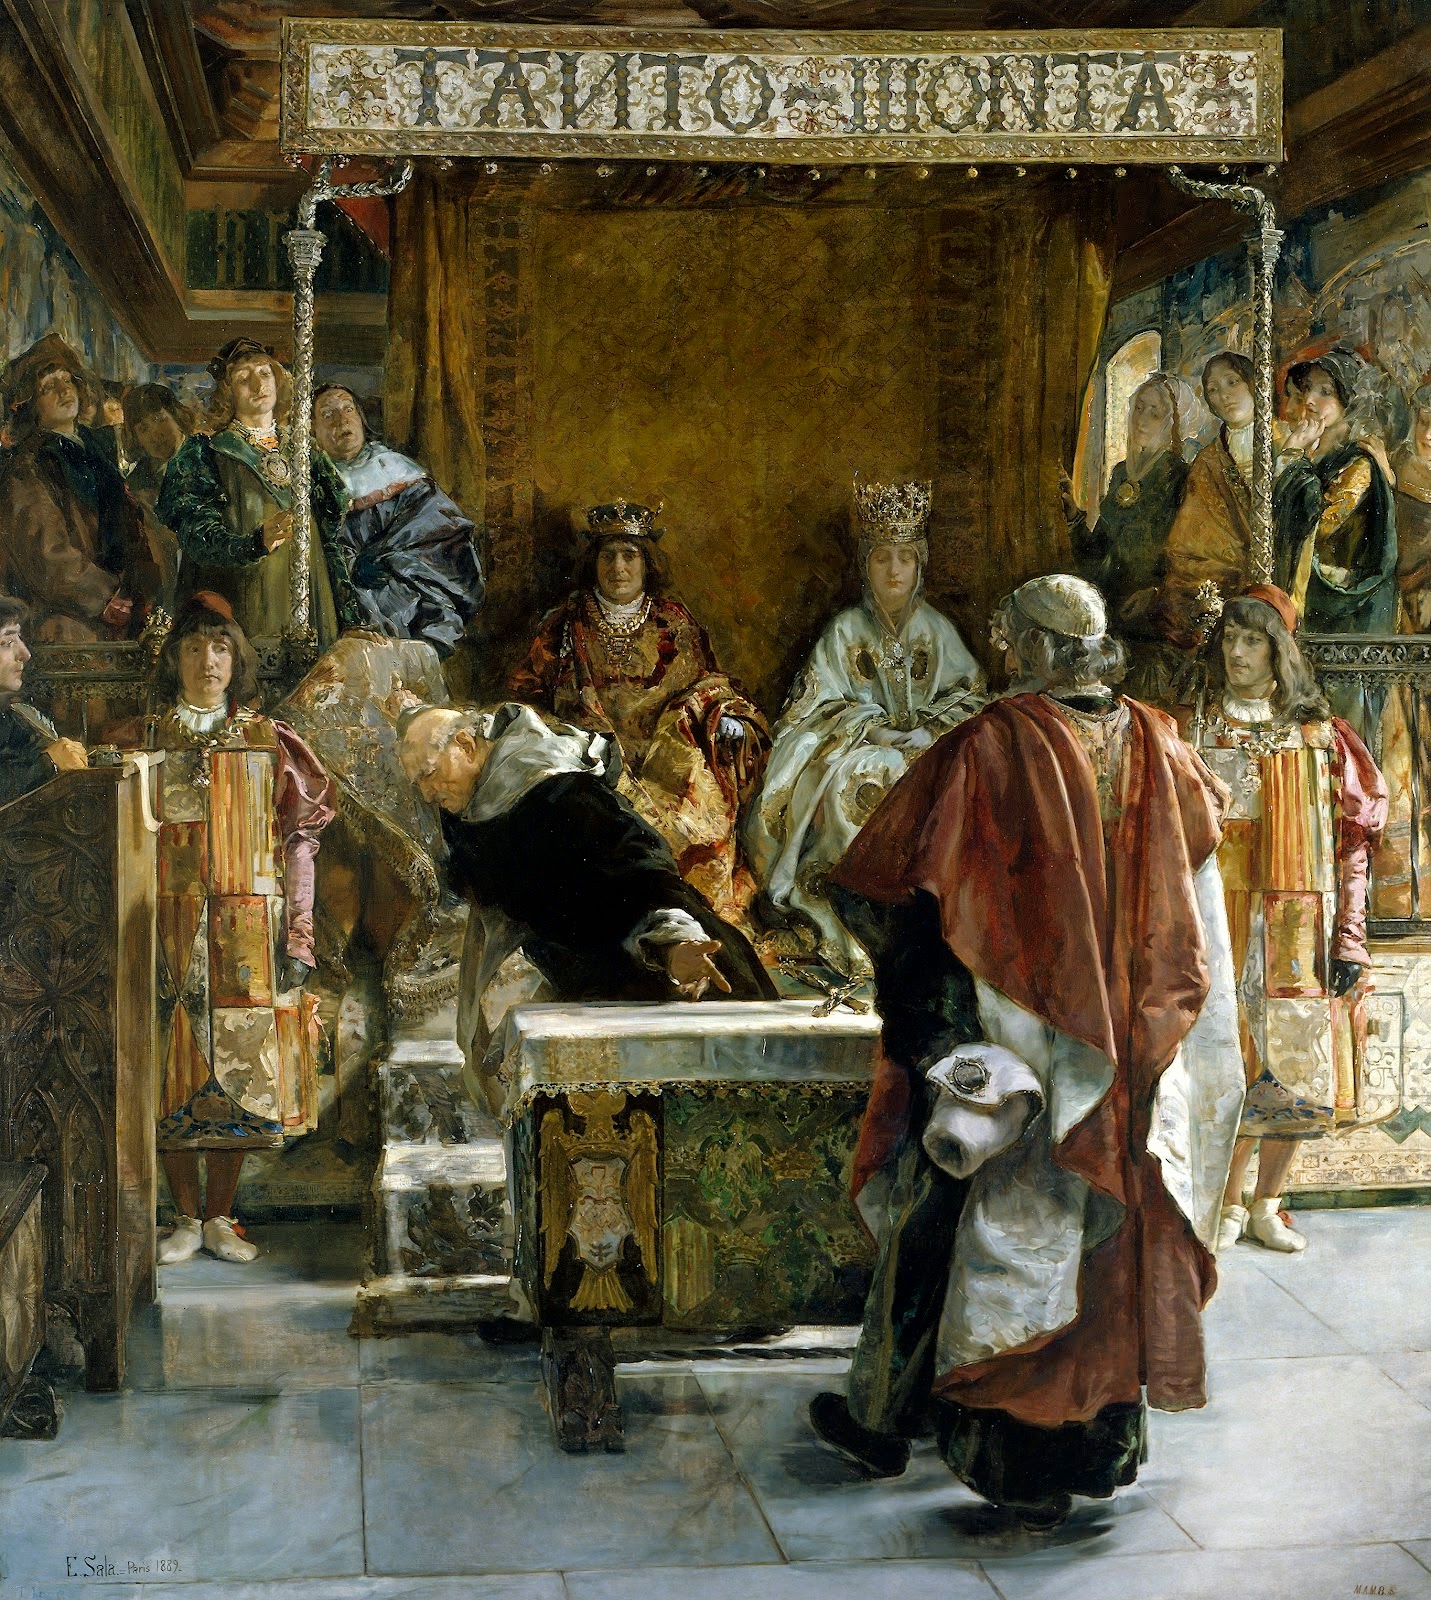 Expulsion of the Jews by the Catholic Kings